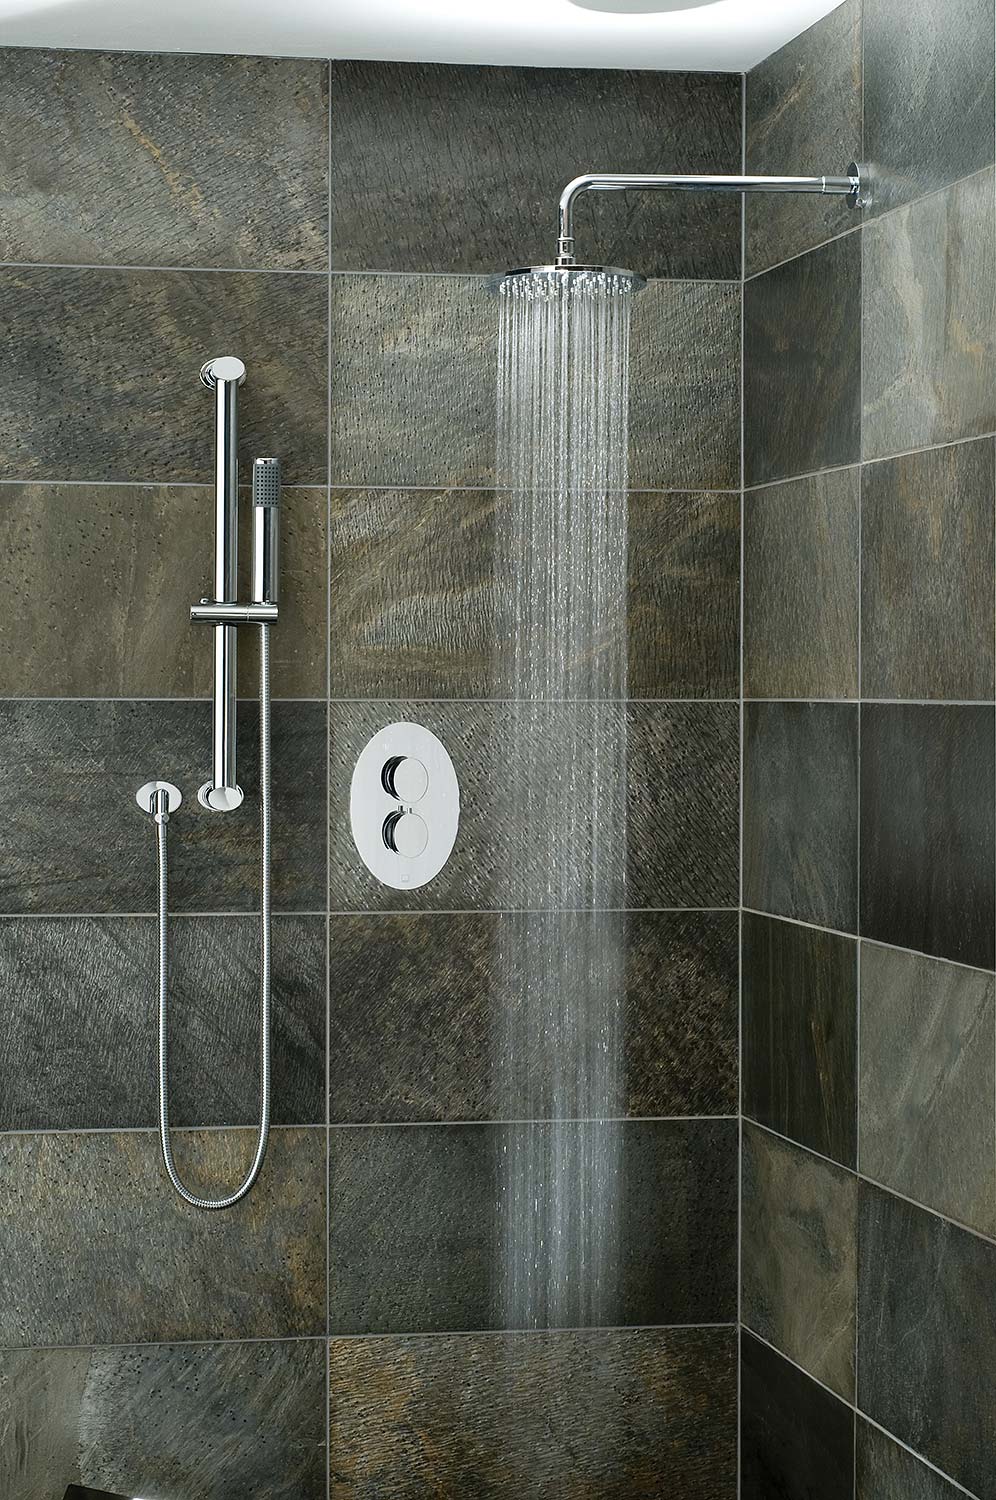 Tiled bathroom with a slide rail shower kit, shower arm and head, and oval thermostatic valve with and water cascading from the shower head